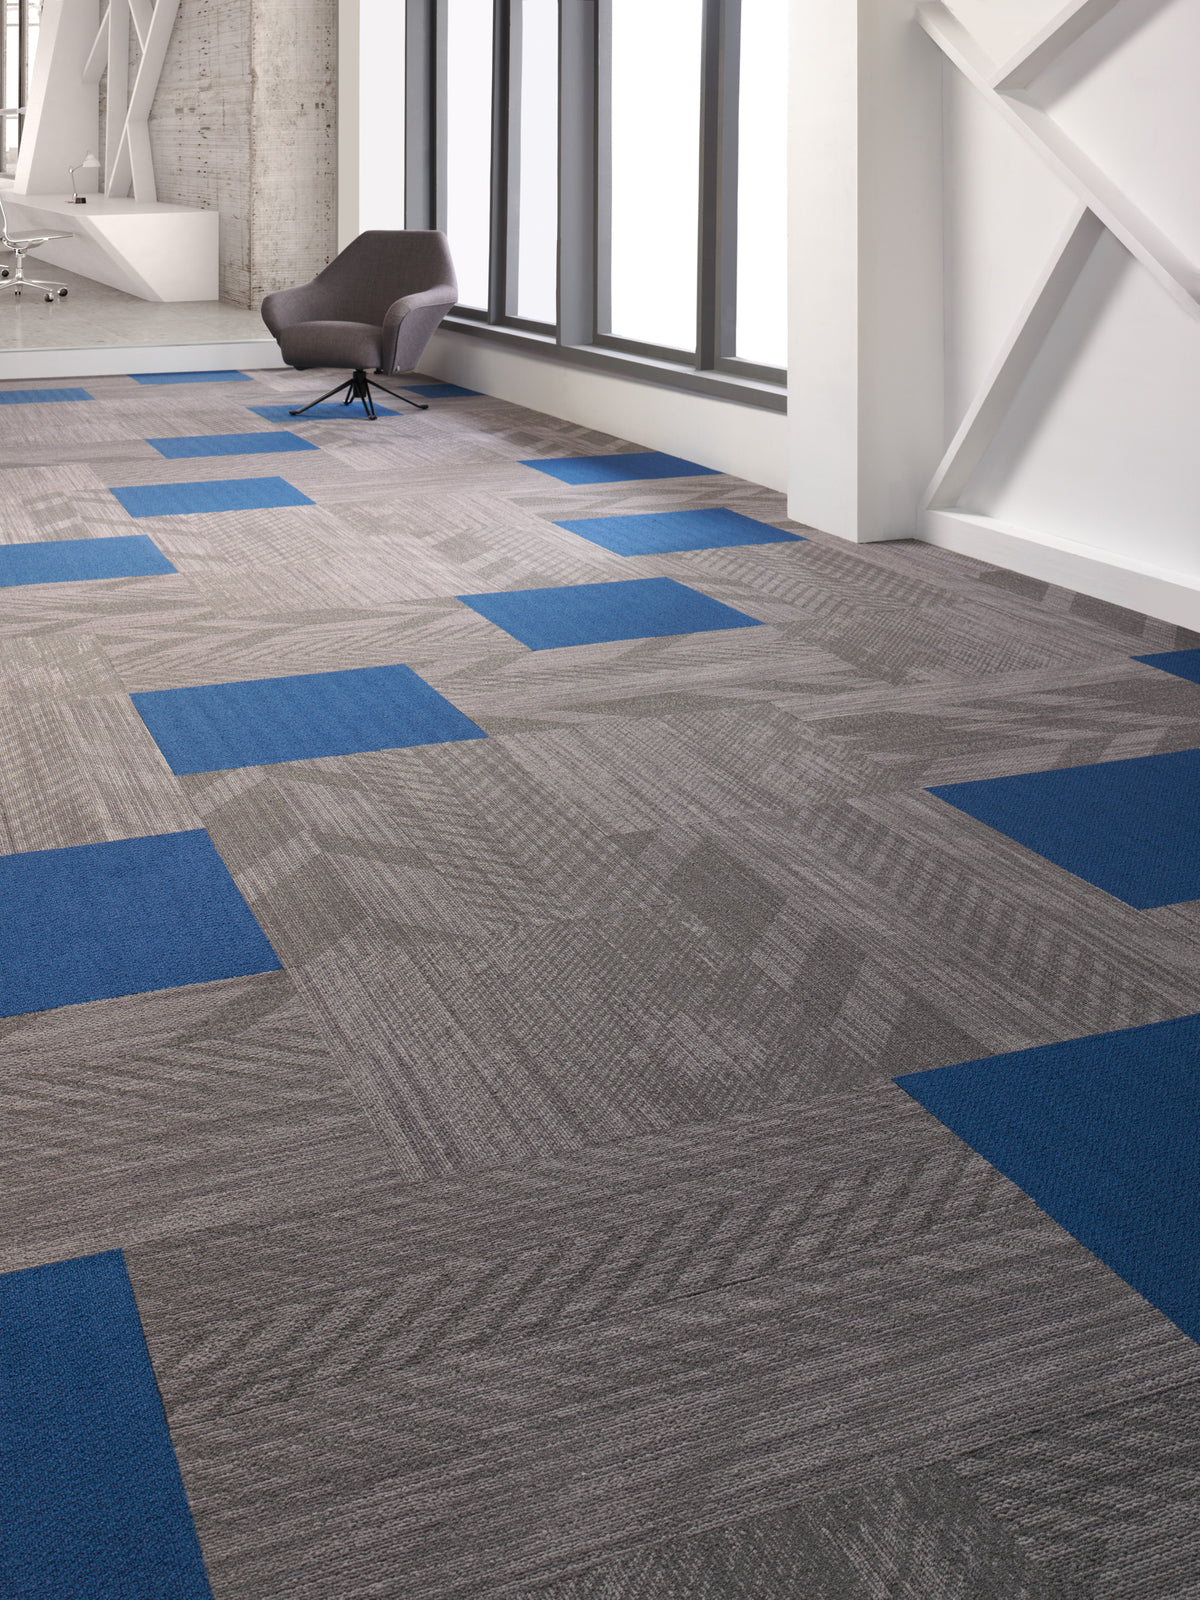 Mohawk Group - Colorbeat - Commercial Carpet Tile - Sterling Gray